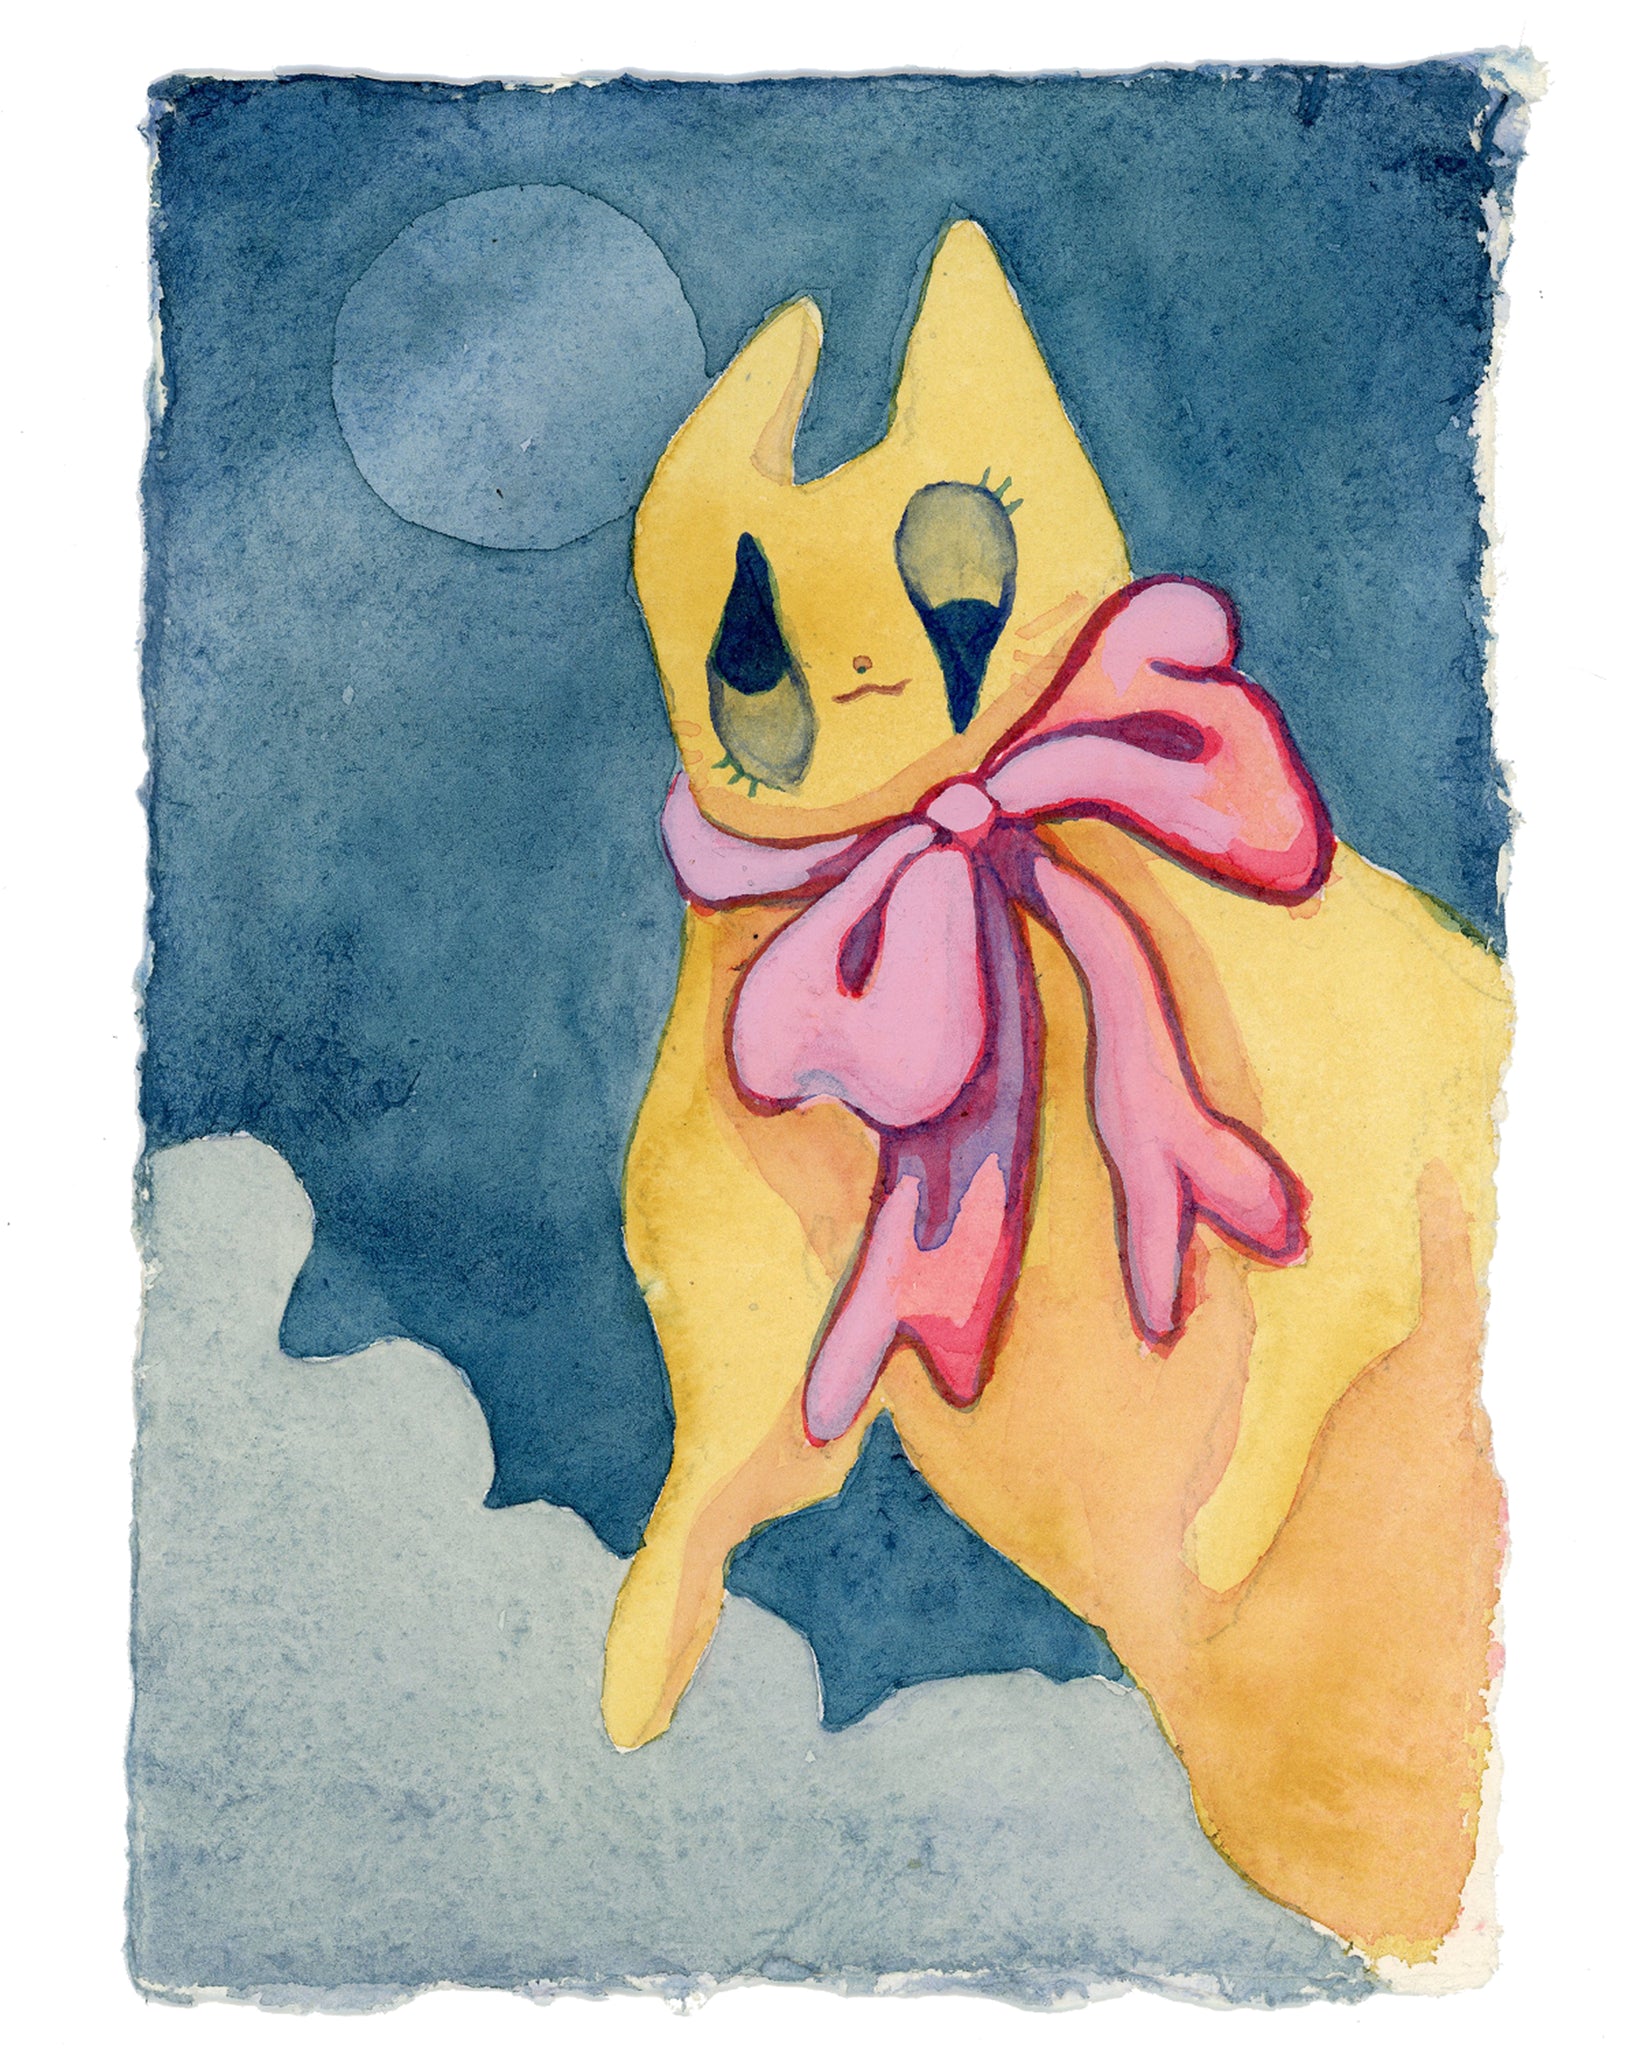 Watercolor #4: "The Rag Cat Under Midwinter Moon" Handmade A5 Watercolor Paper with Deckled Edges